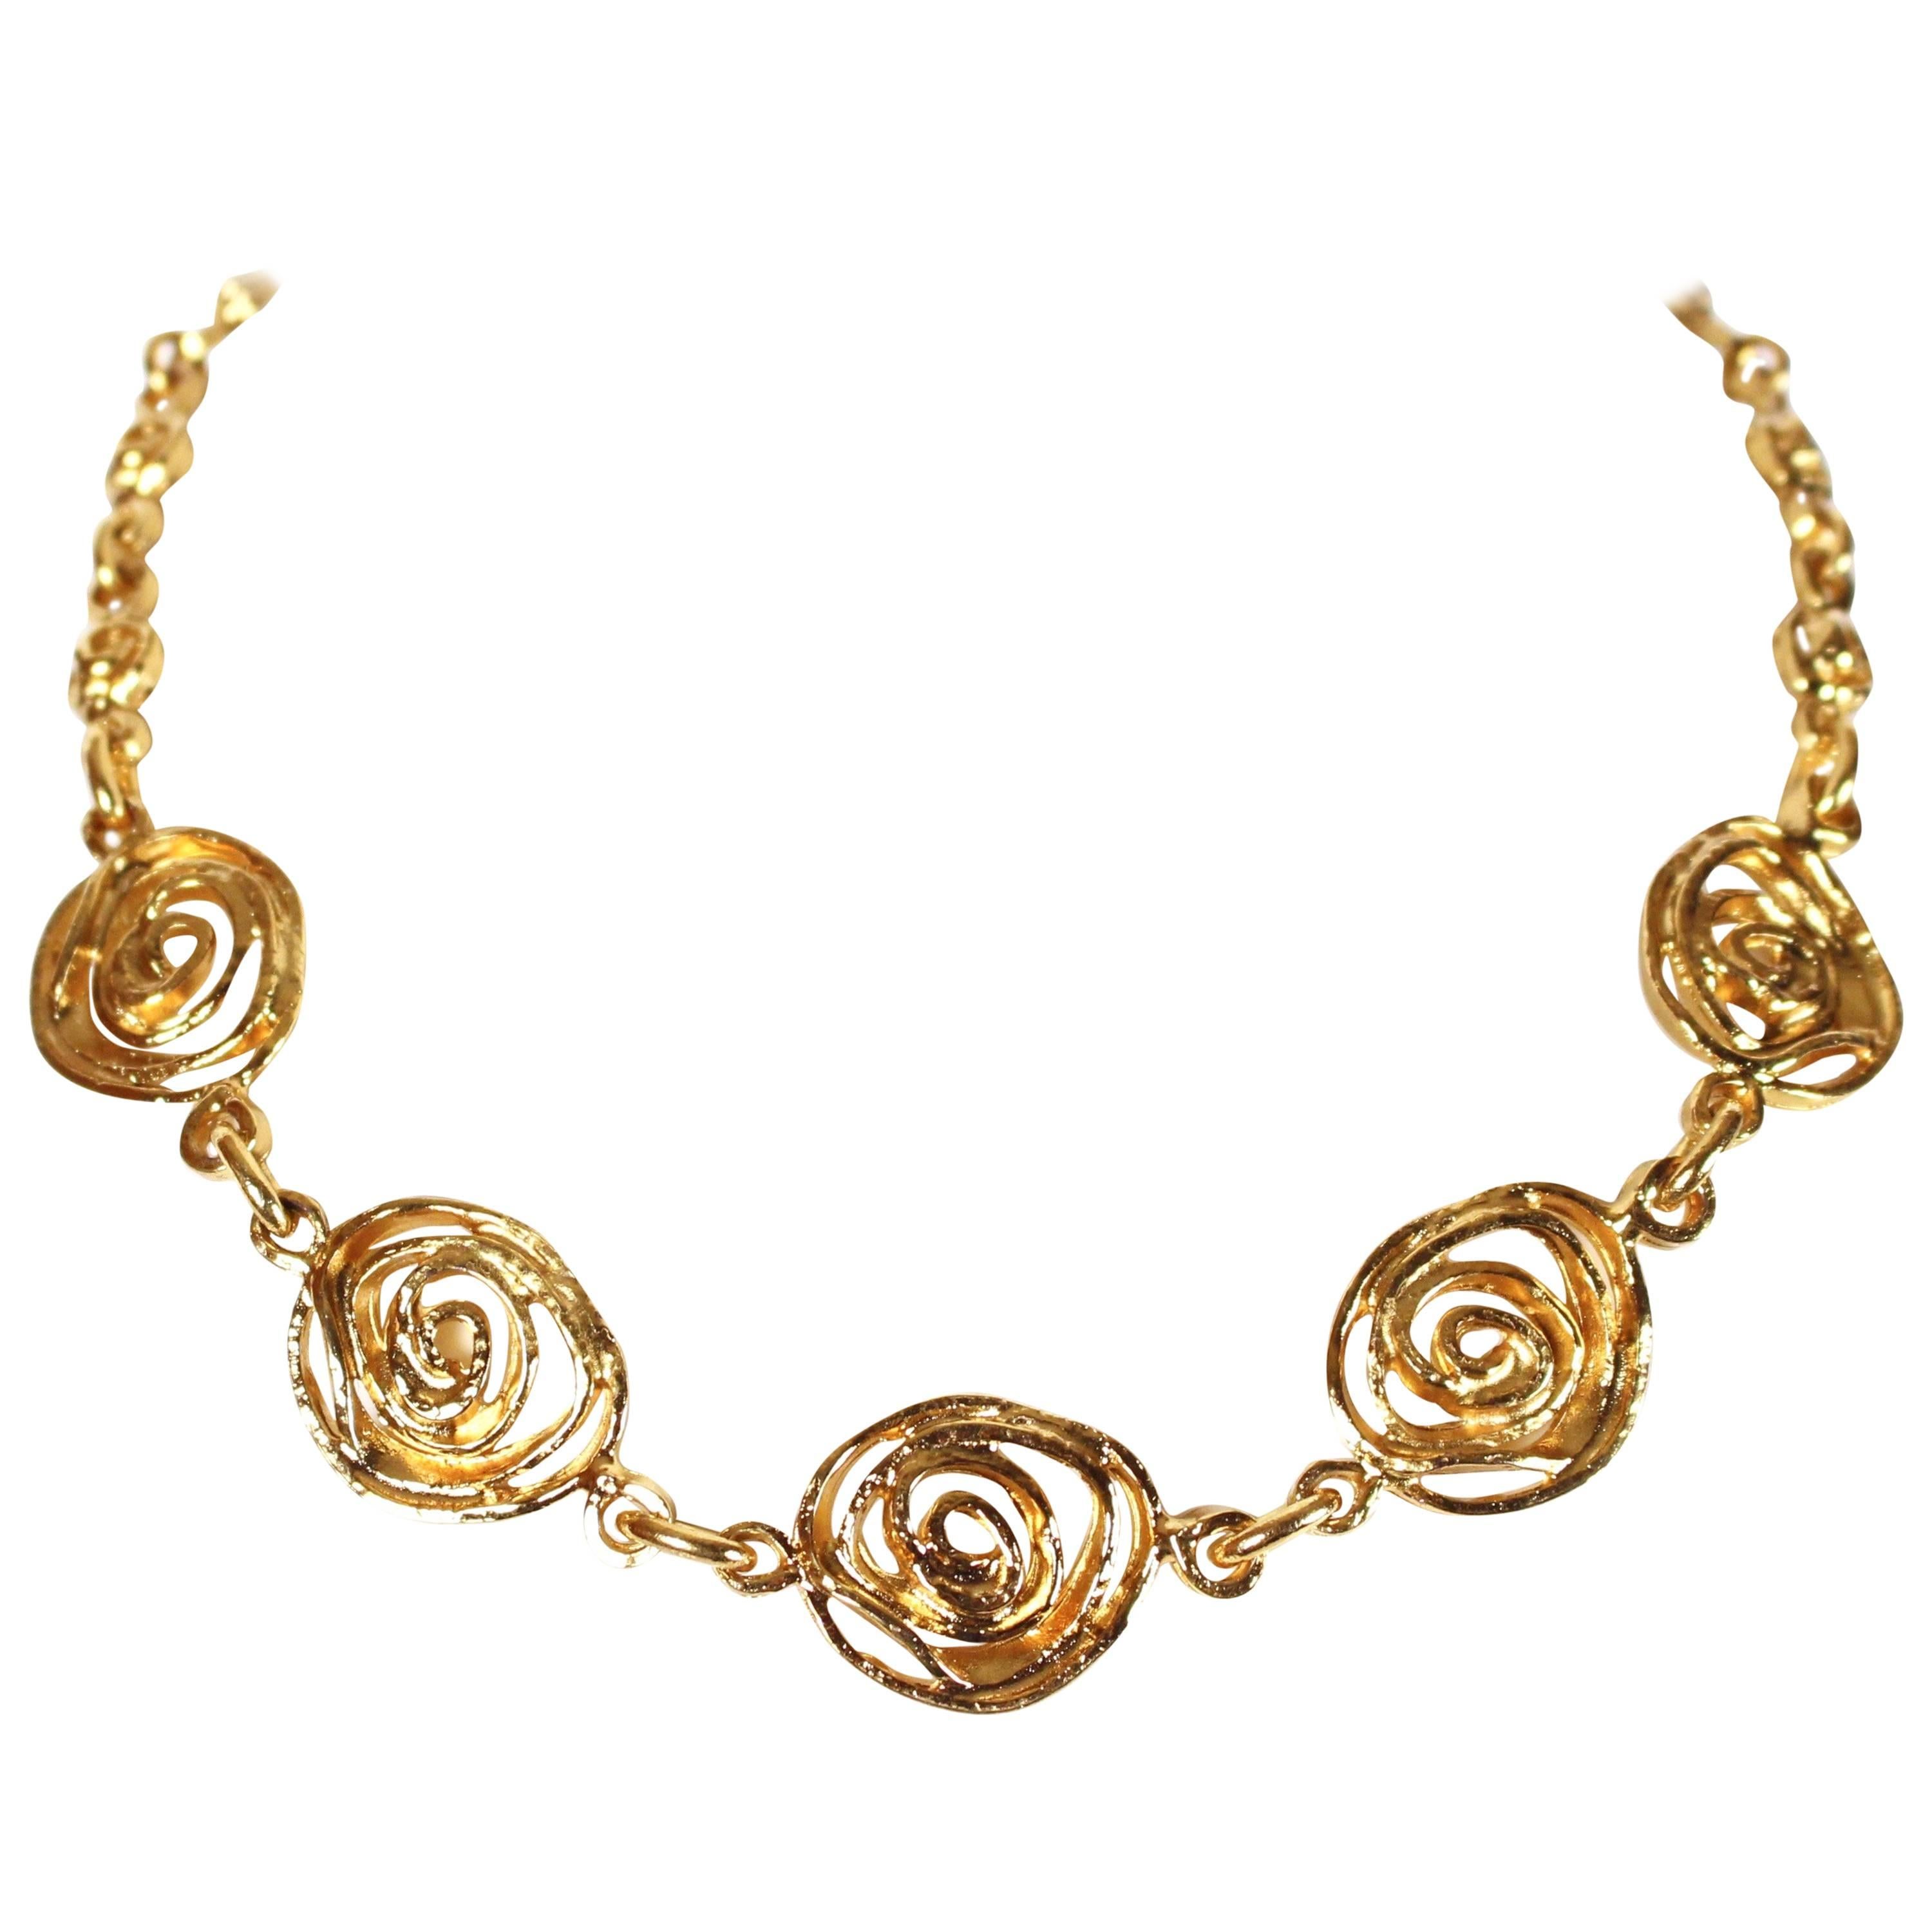 Yves Saint Laurent abstract rose gilt necklace, 1980s 